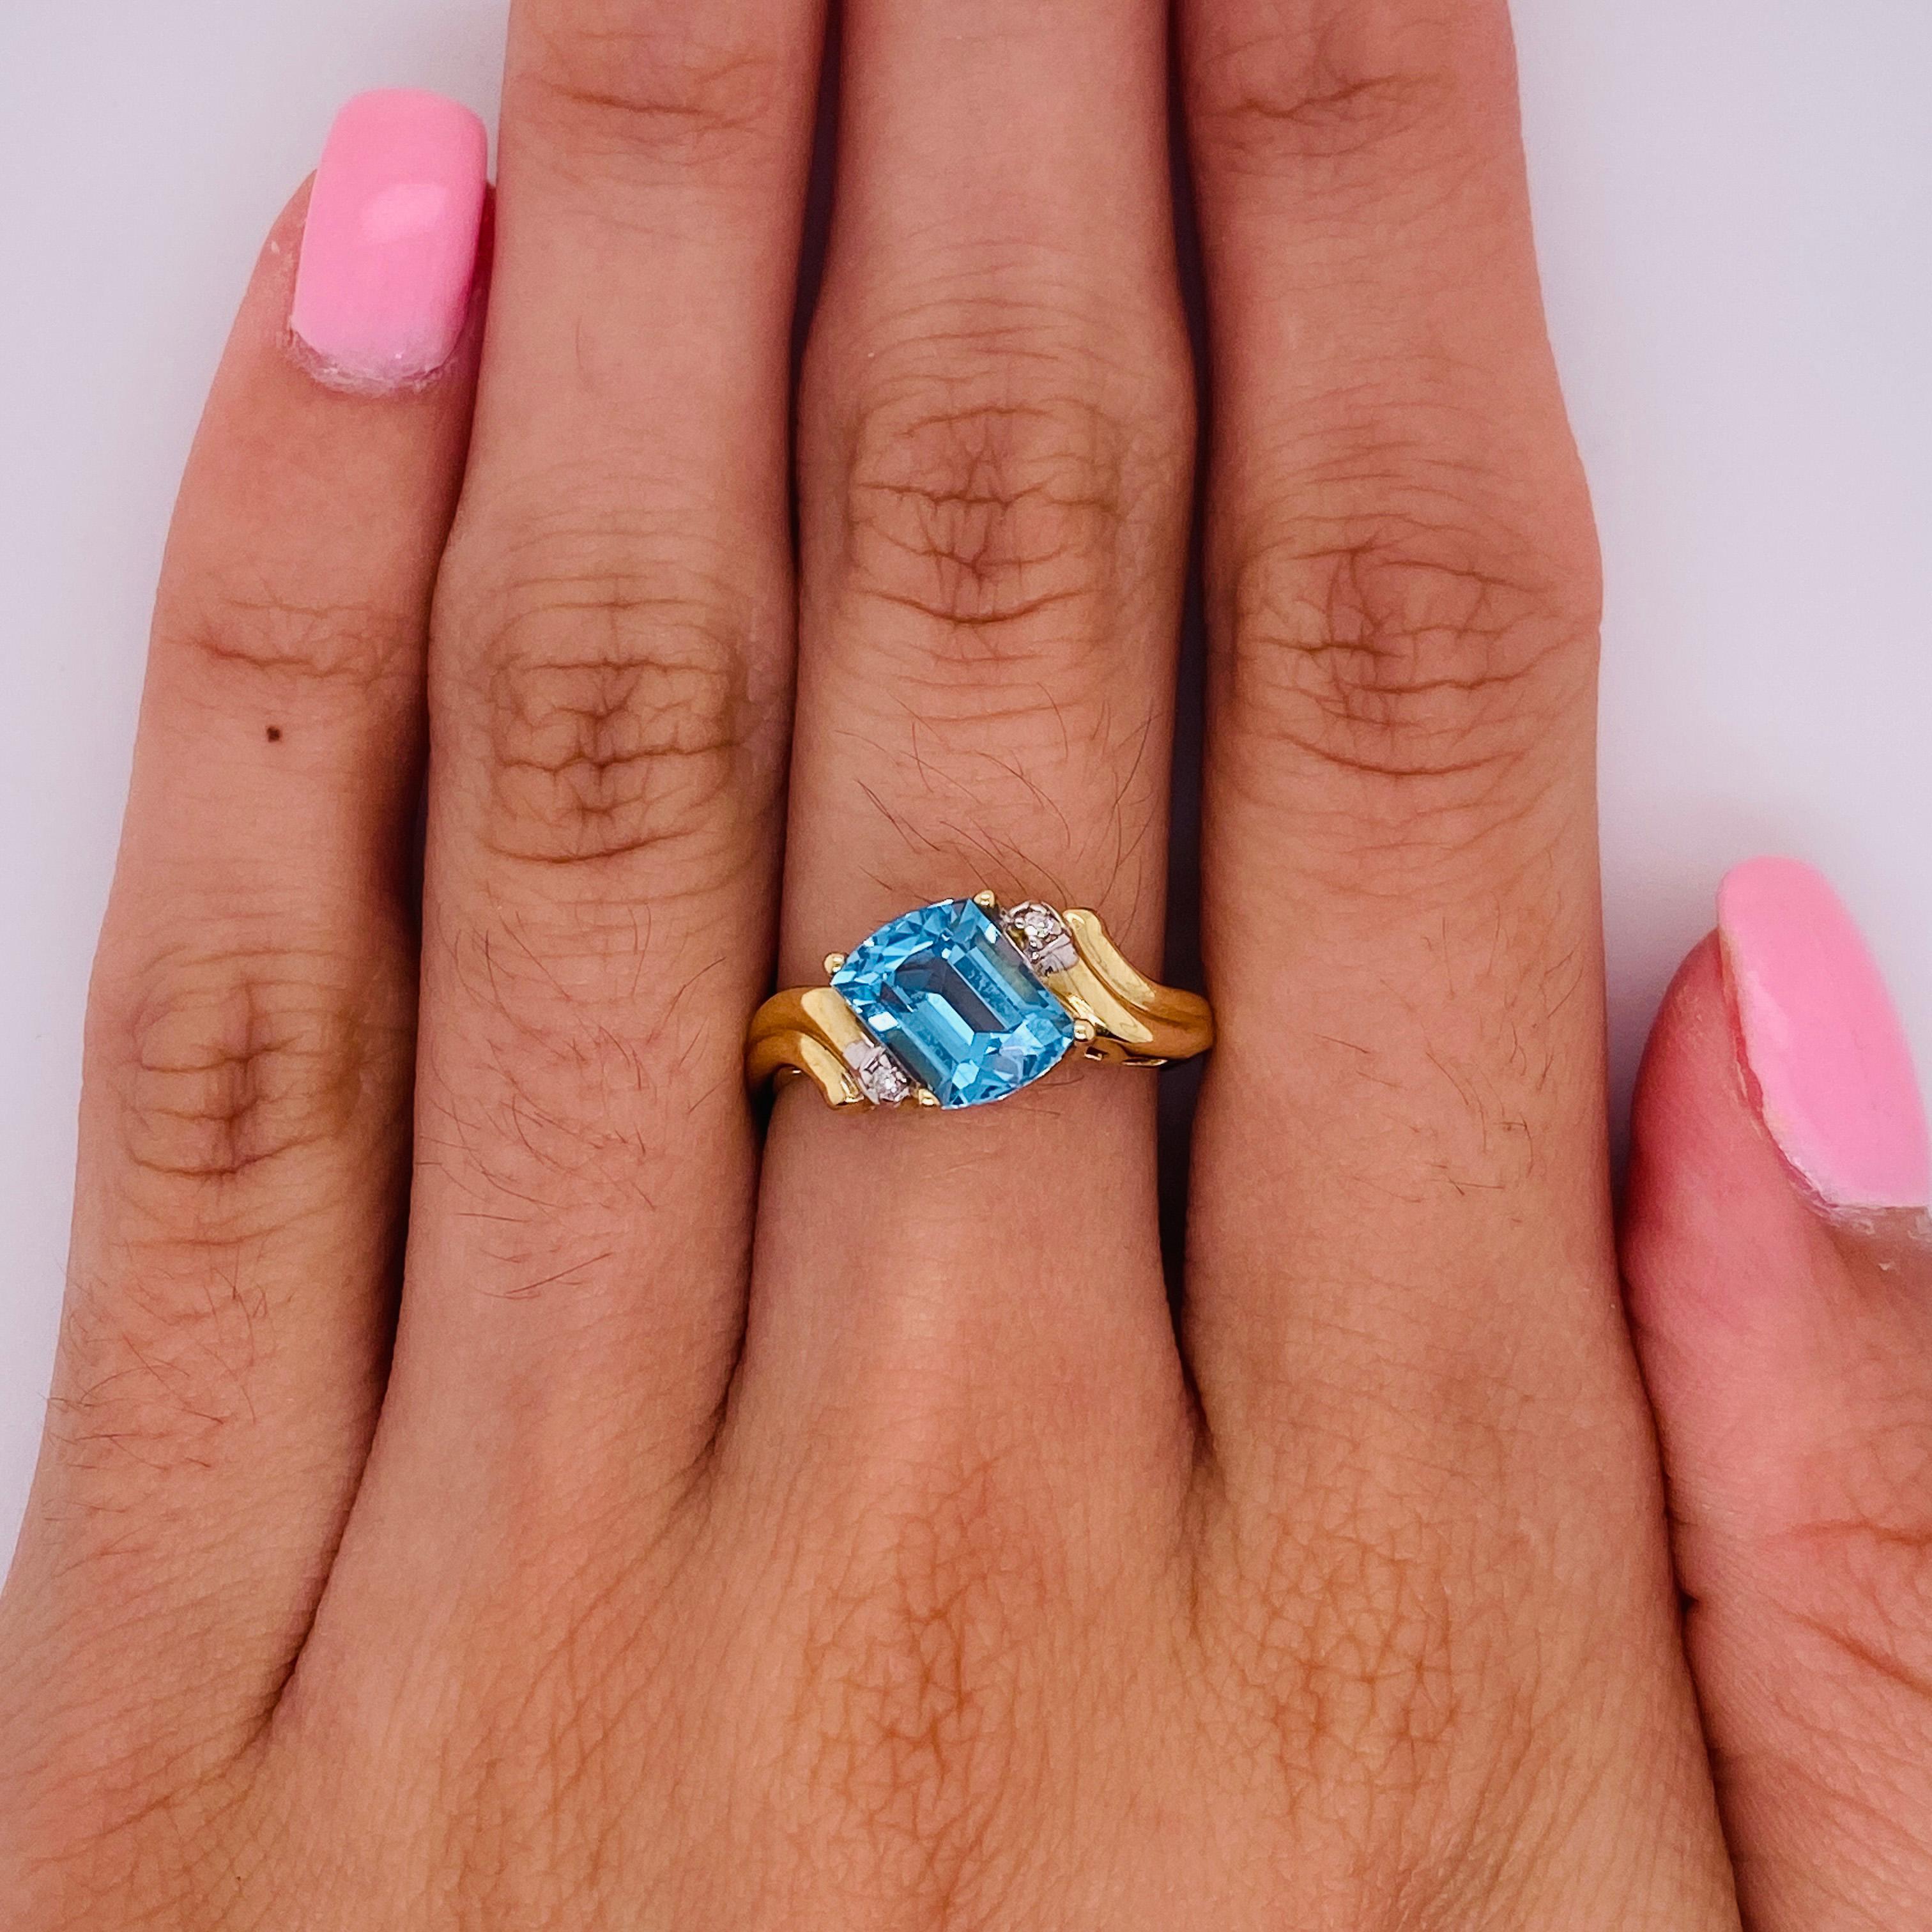 Surprise your December loved one with a ring as special and unusual as they are! This beautiful bypass ring features a fancy cut 1.25 carat bright blue topaz with diamond accents. Blue topaz is one of December's birthstones. Honor a special someone